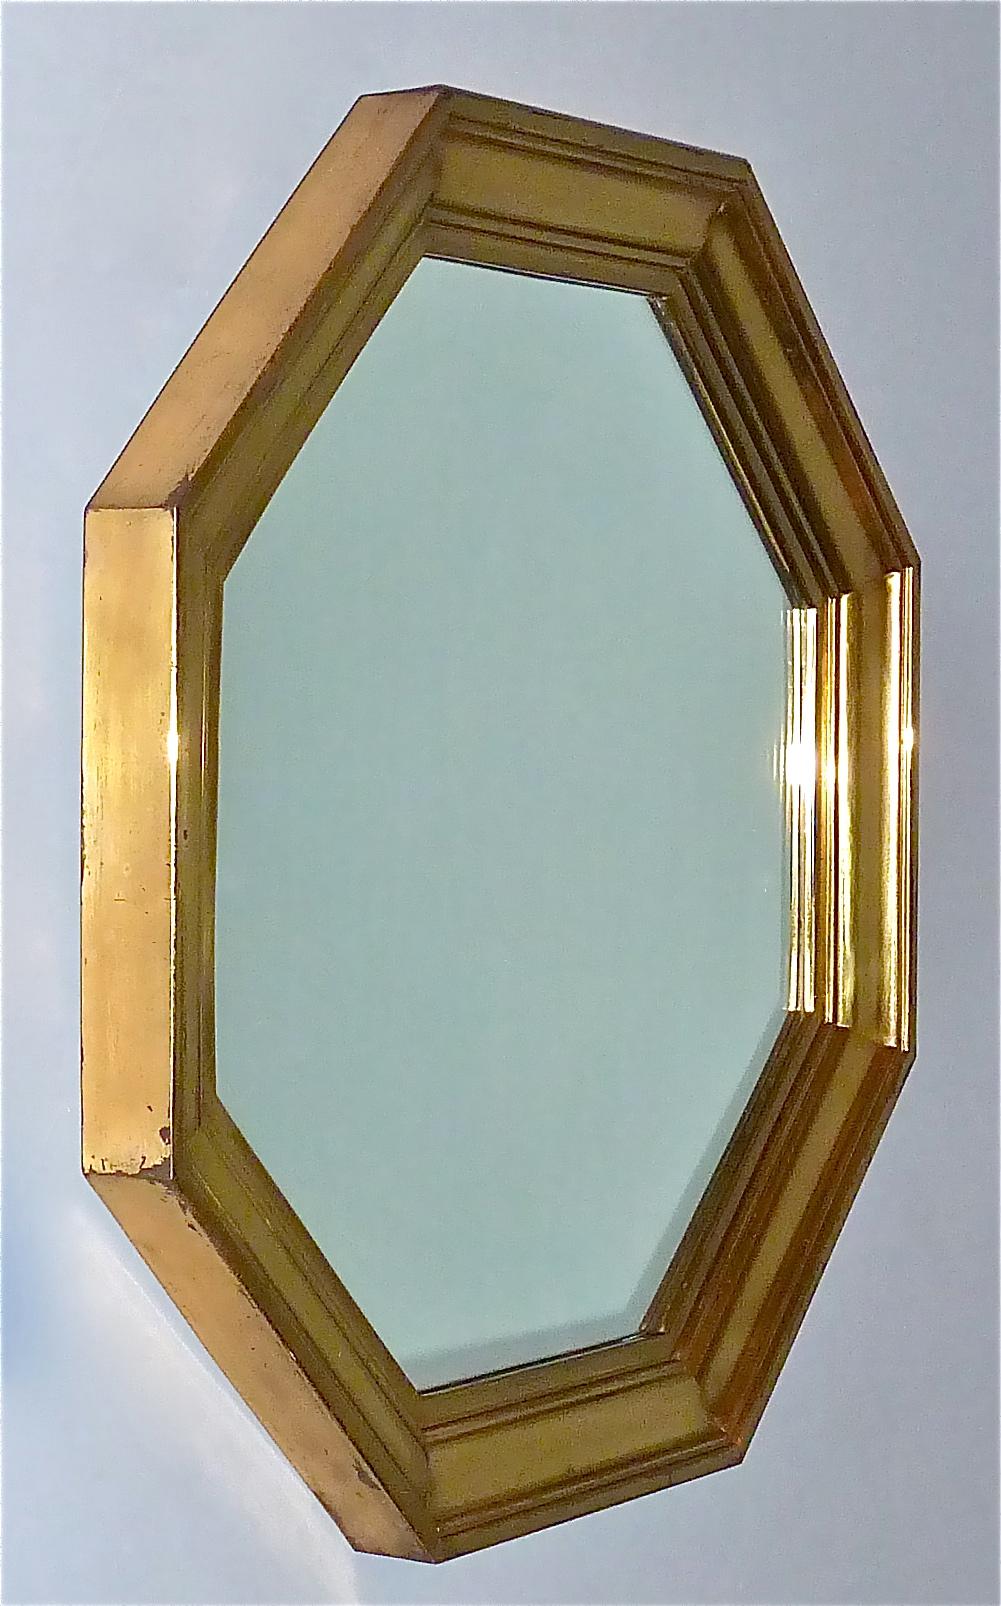 Large Maison Jansen Octagonal Patinated Brass Mirror Crespi Rizzo Style, 1970s For Sale 13